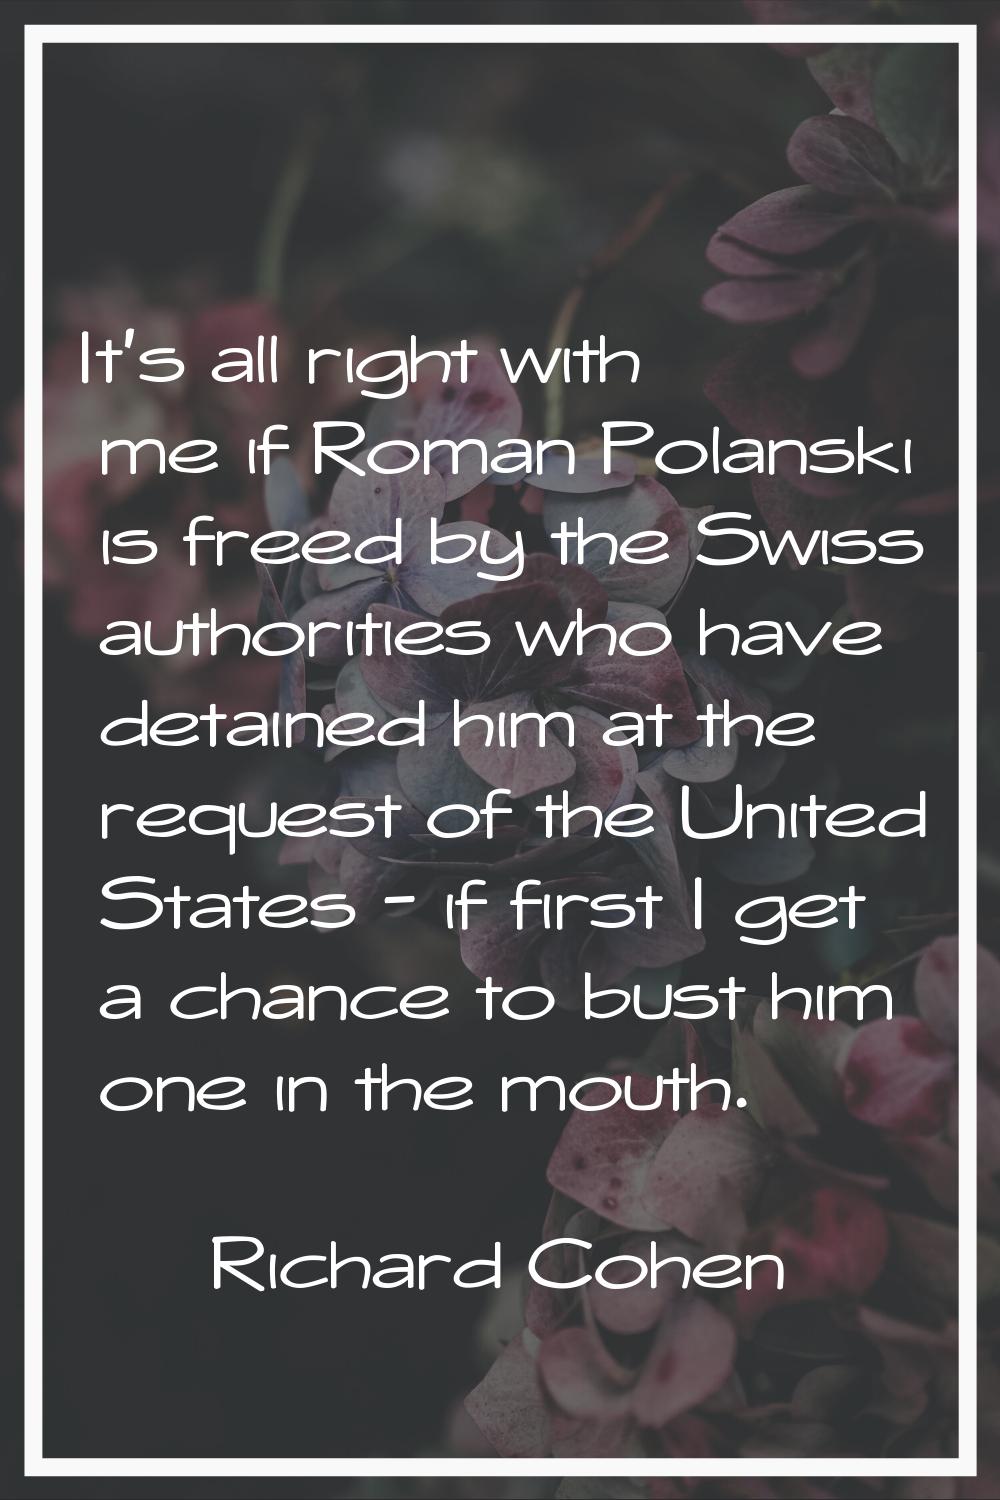 It's all right with me if Roman Polanski is freed by the Swiss authorities who have detained him at